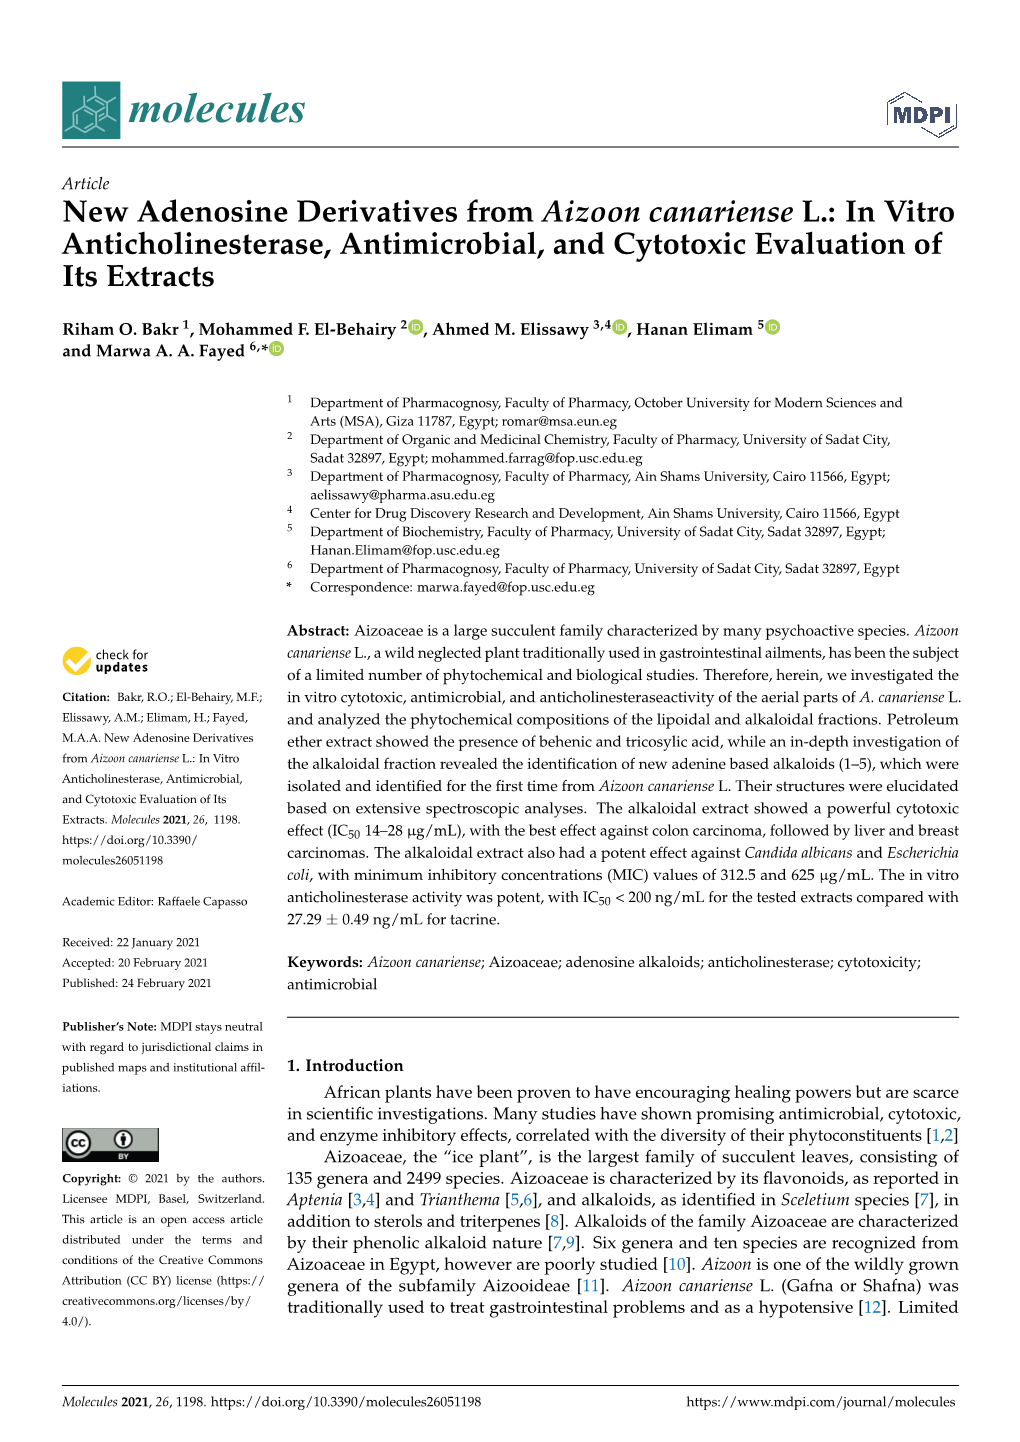 New Adenosine Derivatives from Aizoon Canariense L.: in Vitro Anticholinesterase, Antimicrobial, and Cytotoxic Evaluation of Its Extracts